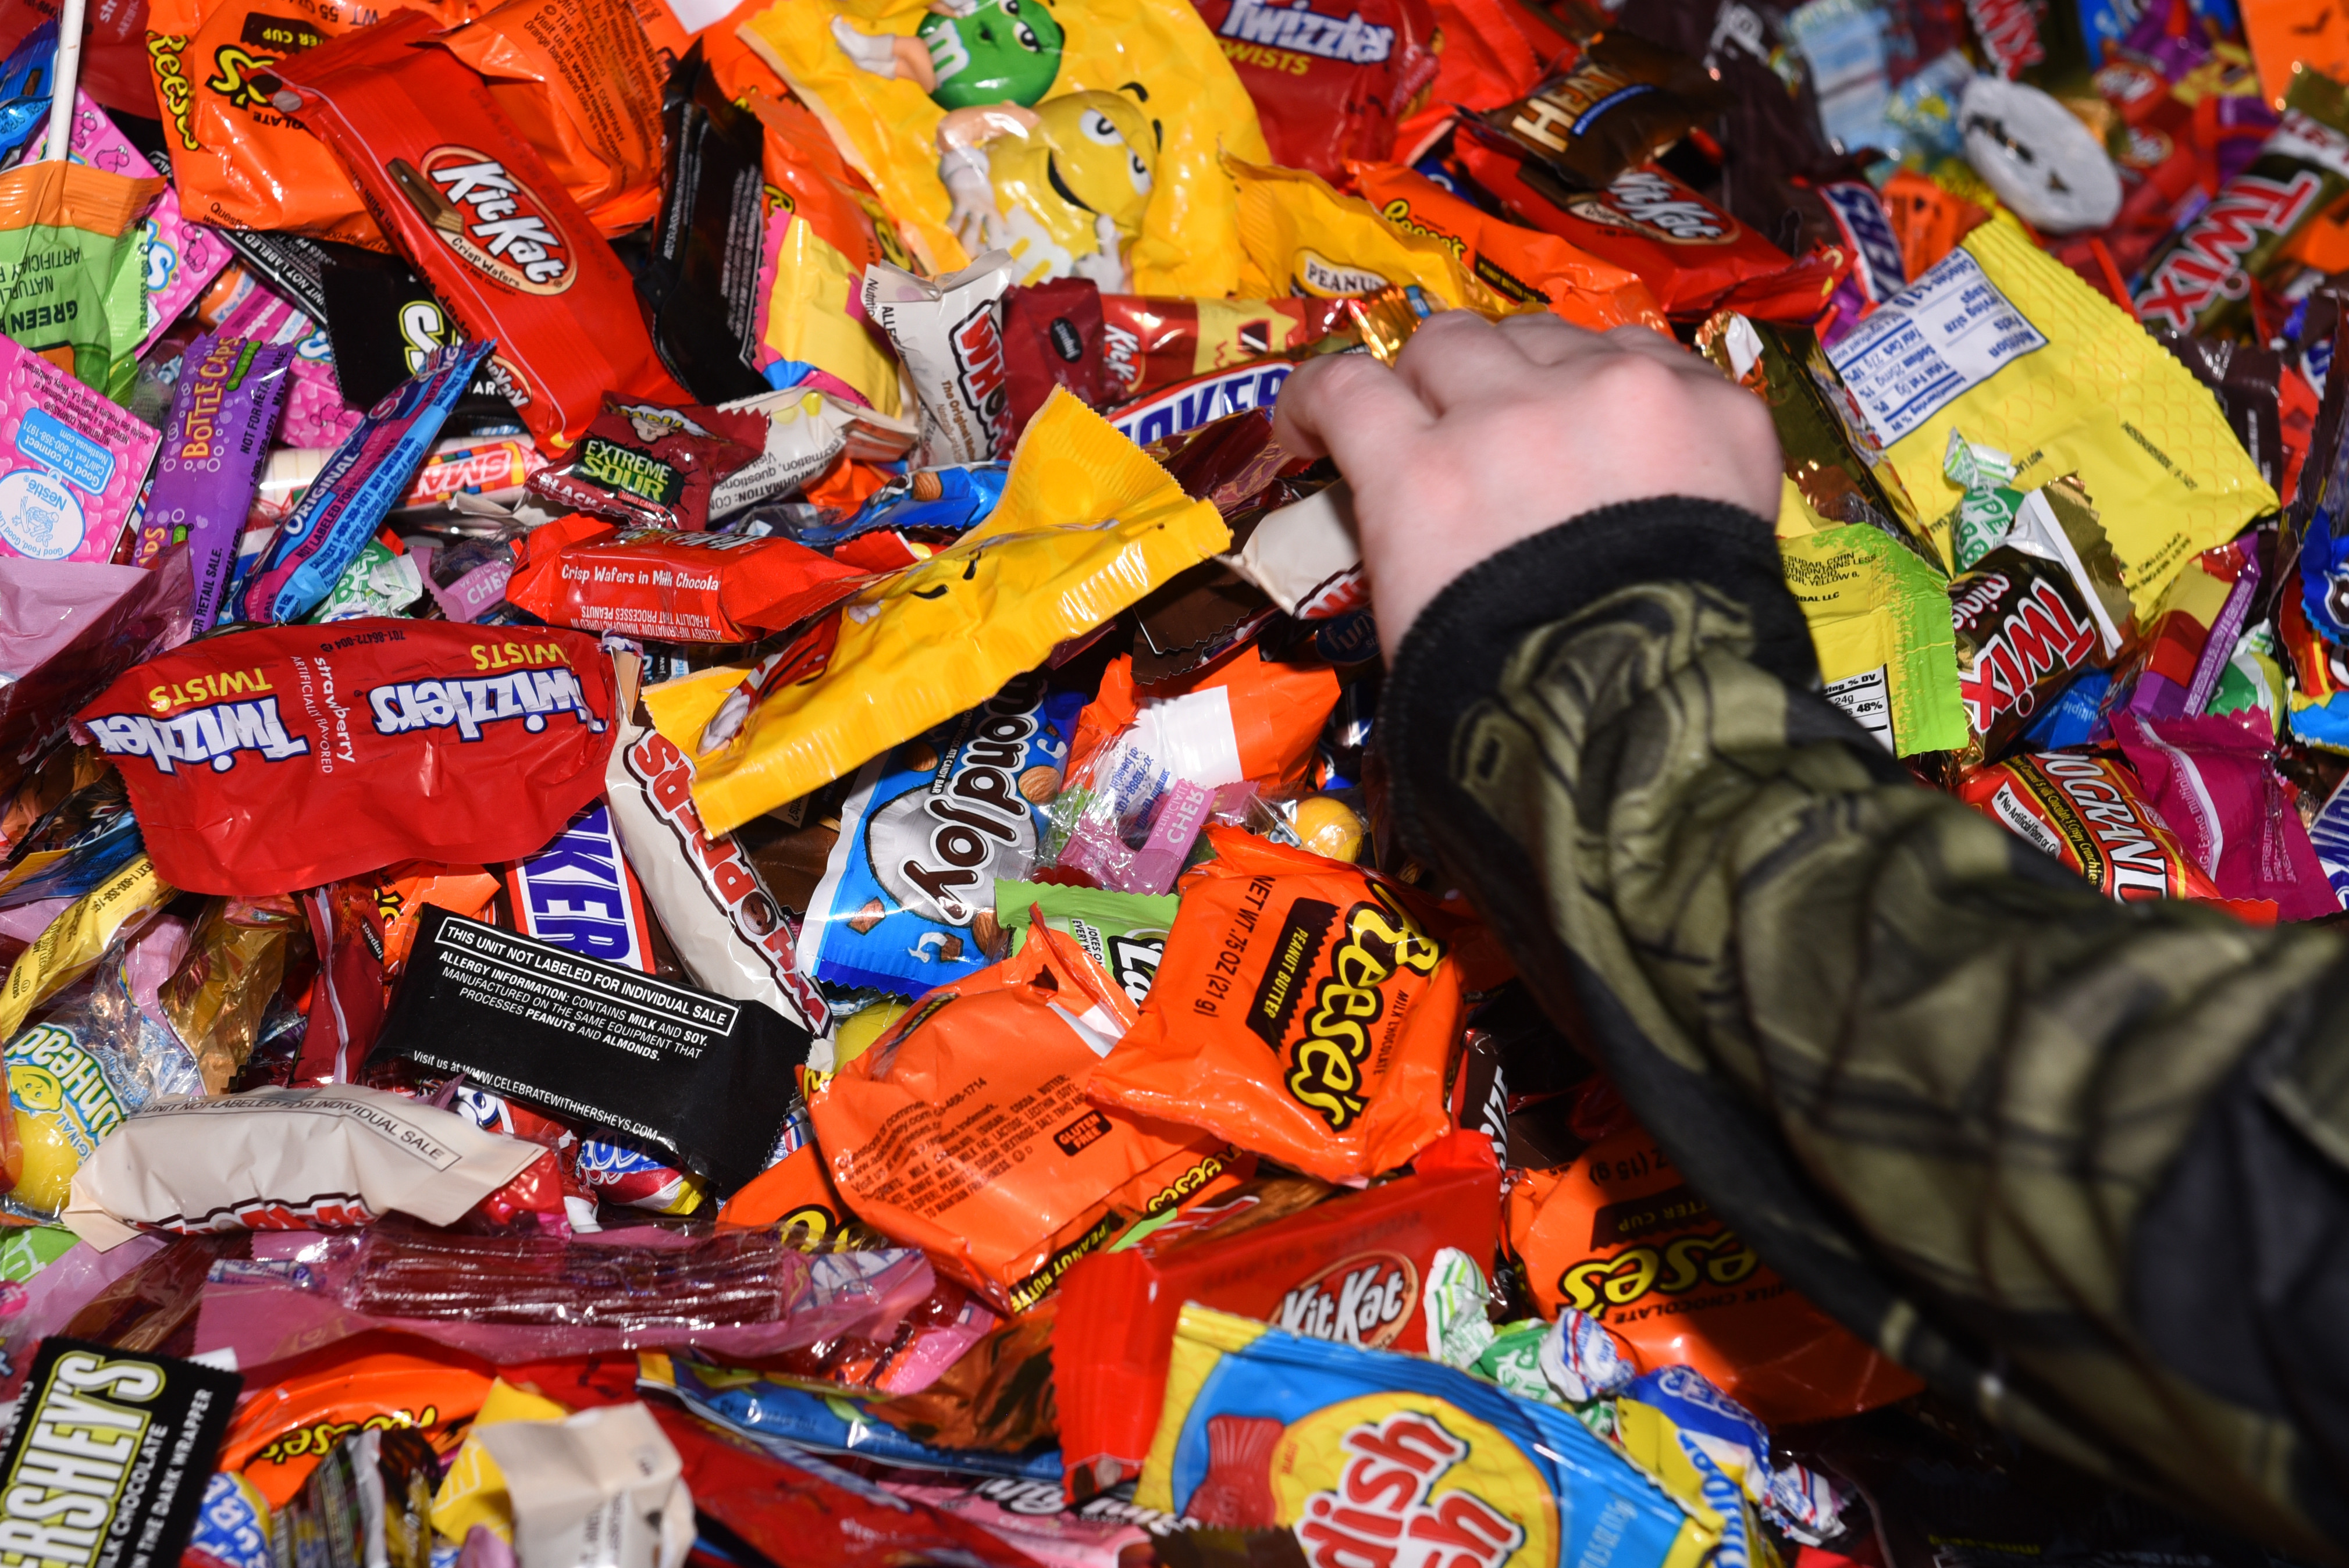 A child attending the Trunk-or-Treat event grabs candy out of a trunk Oct. 25, 2019, at Travis Air Force Base, California. The Airman and Family Readiness Center hosted Trunk-or-Treat, an annual event aimed to provide a safe place for military families to enjoy Halloween festivities. The event had approximately 5,000 attendees and more than 60 vehicles trunks loaded with candy. (U.S. Air Force photo by Airman 1st Class Cameron Otte)